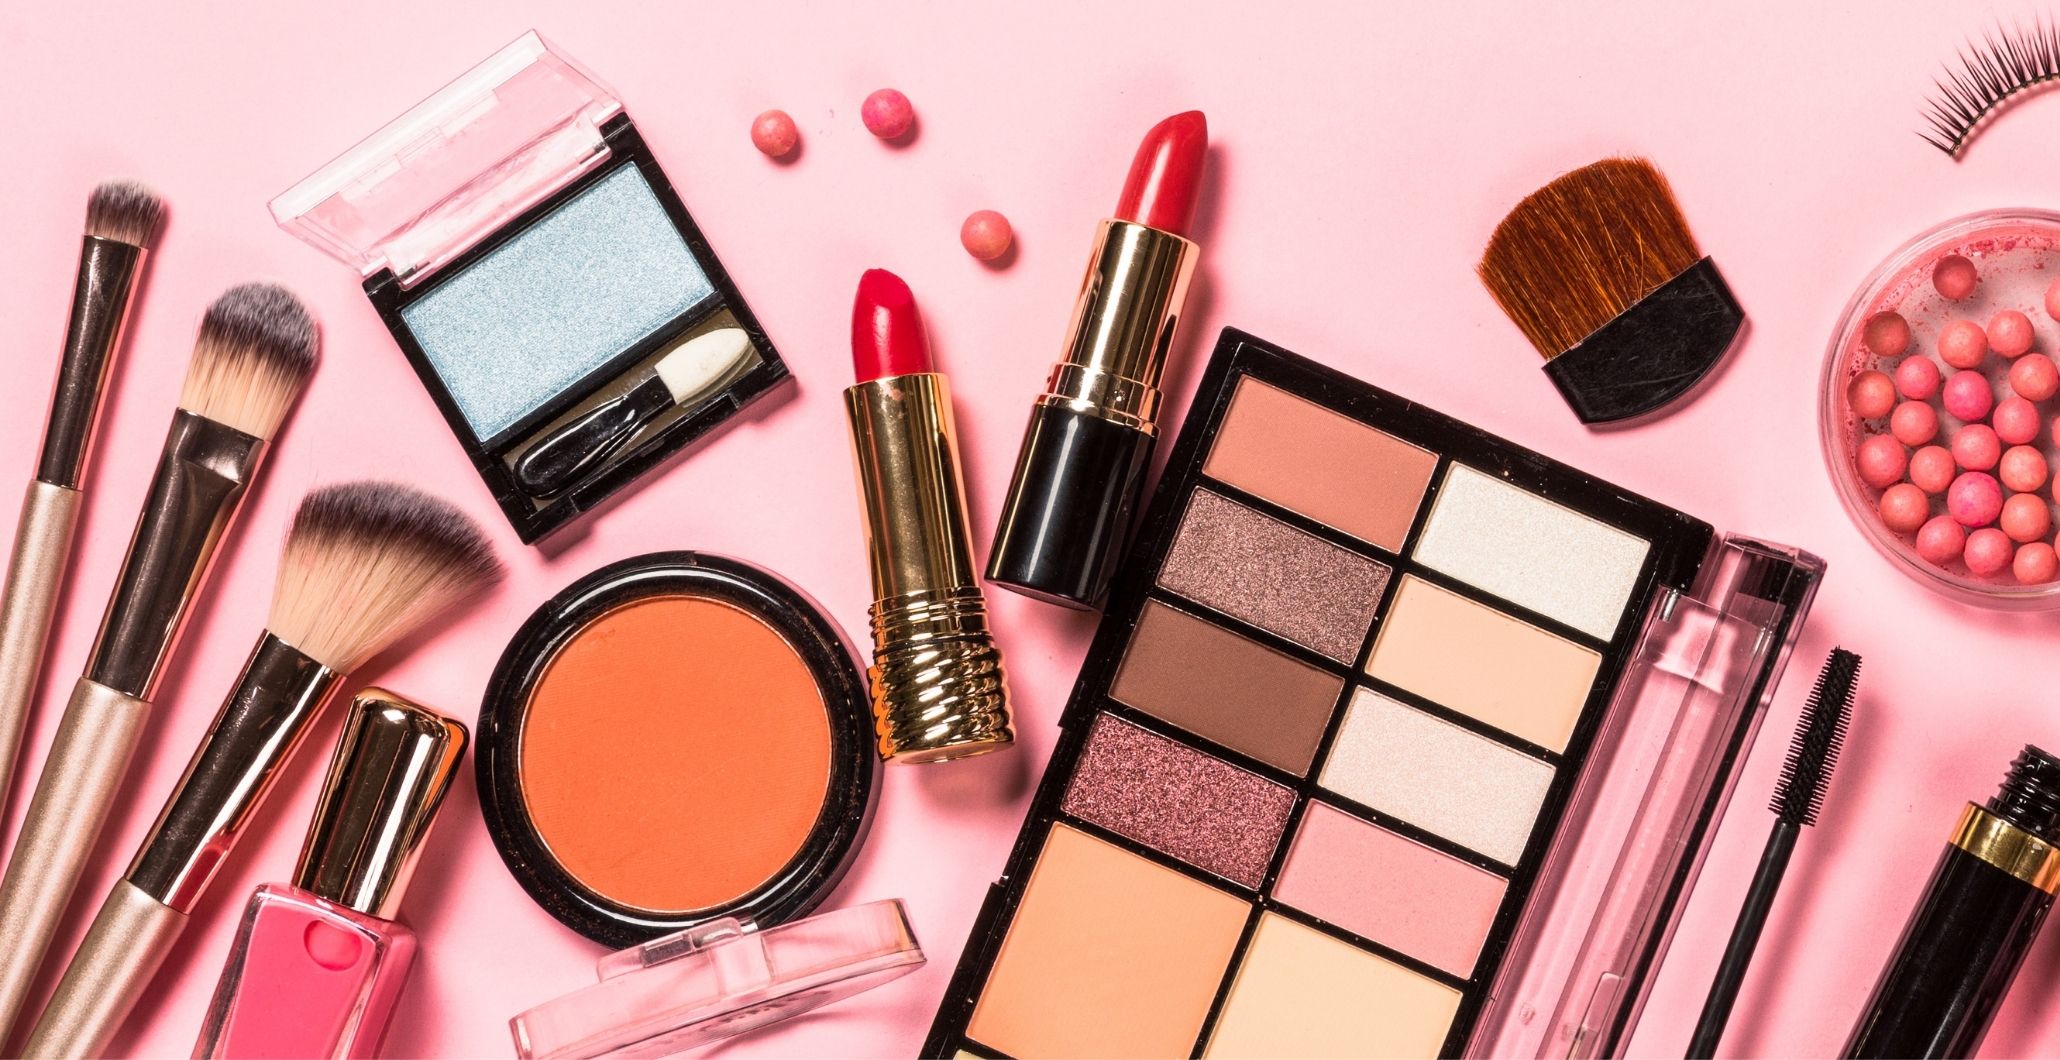 You’re Making Me Blush: The History of Women’s Makeup